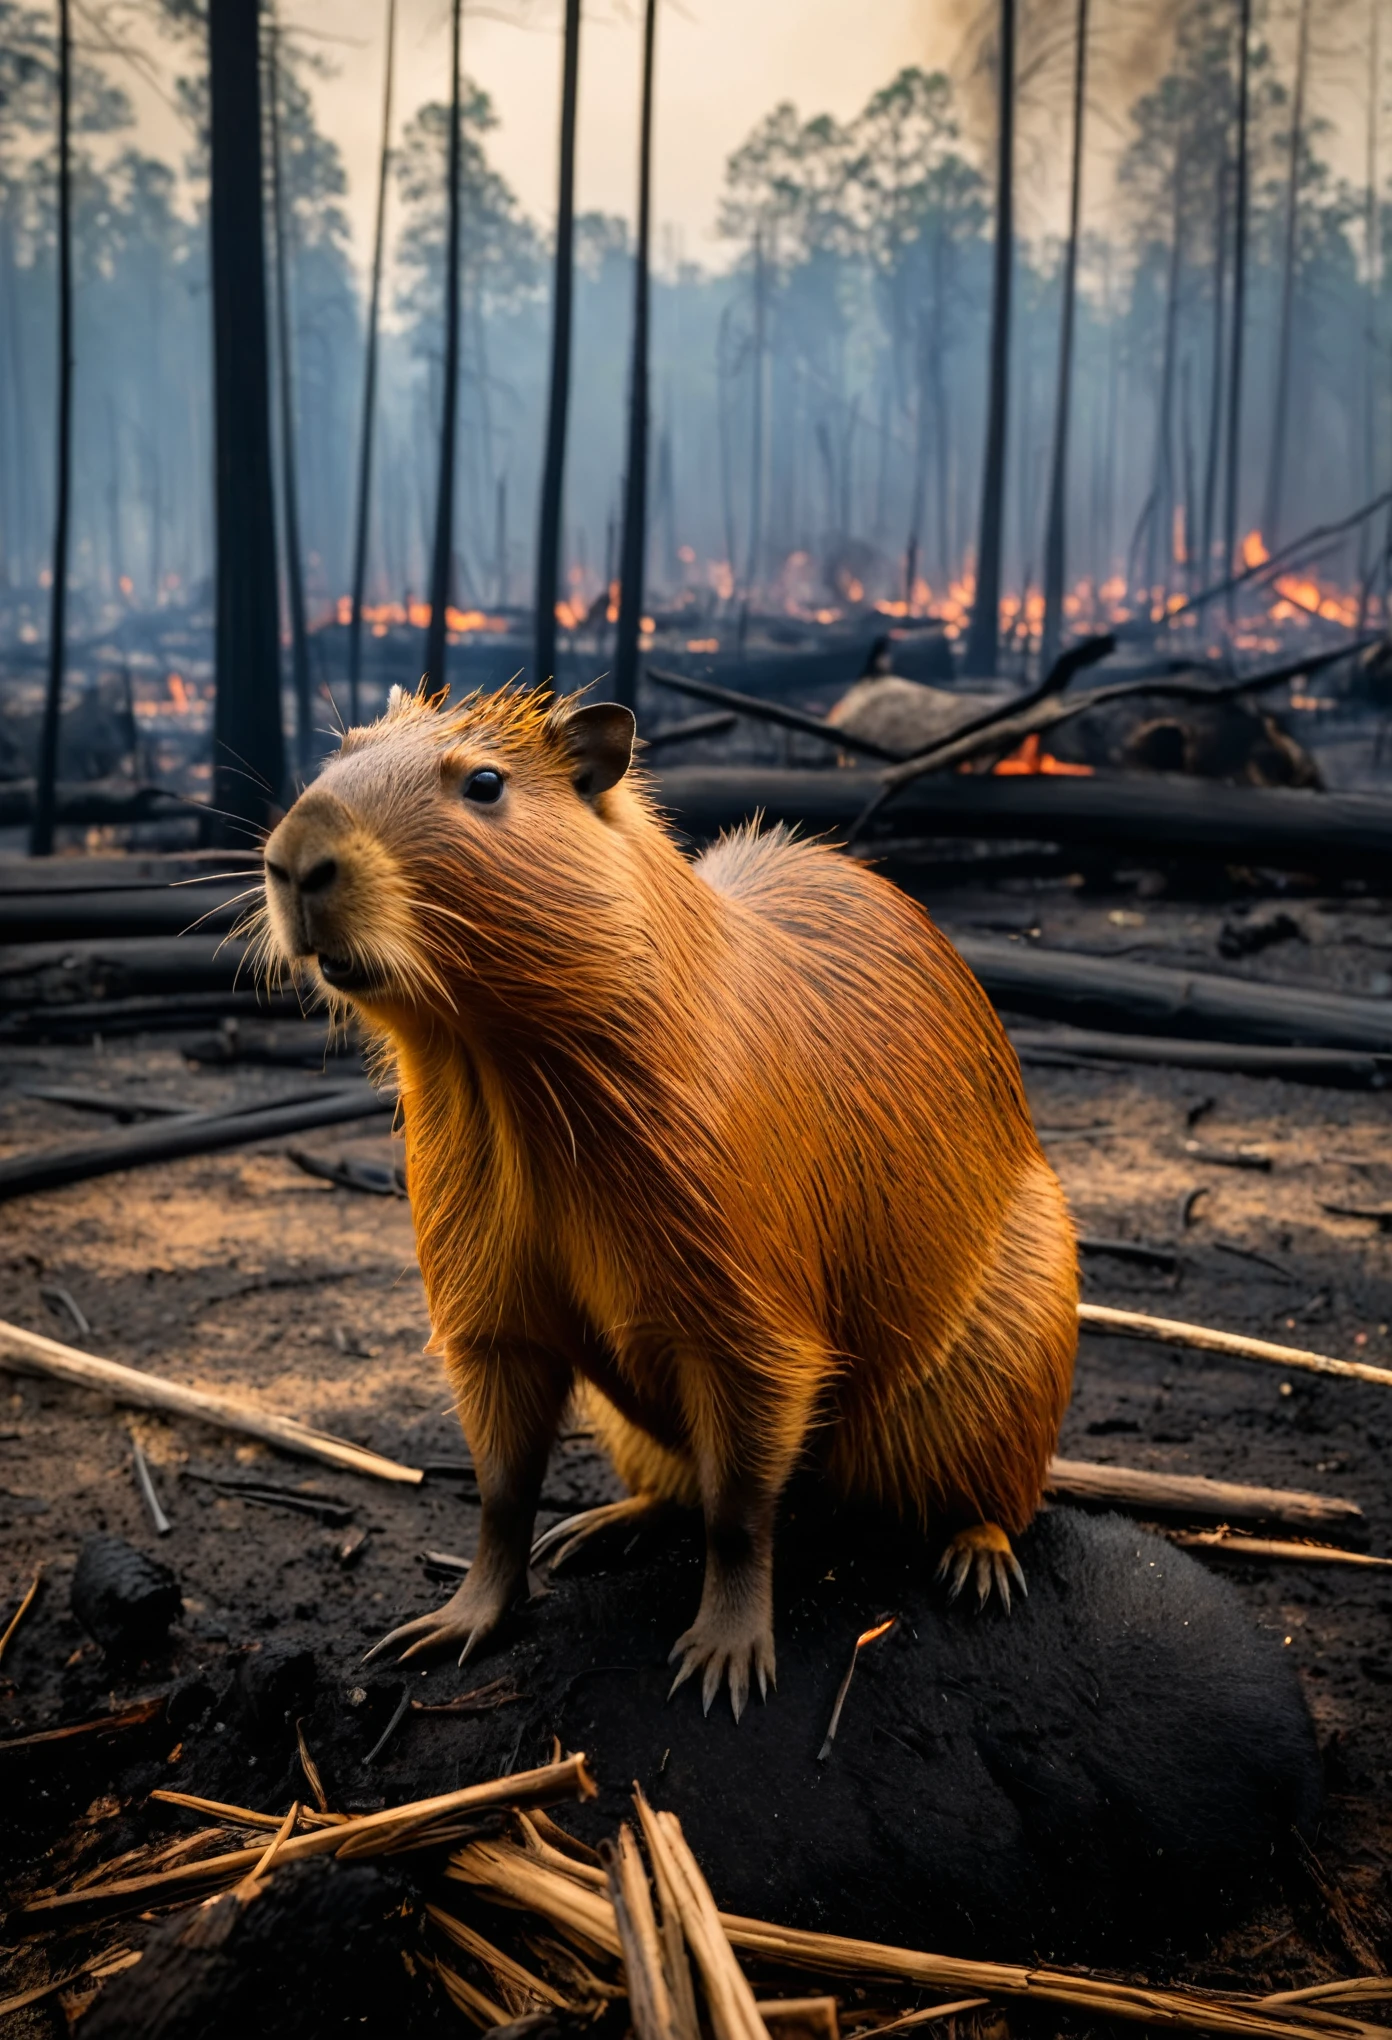 A heartfelt scene of a capybara standing solemnly beside the charred remains of another capybara, lost in the aftermath of a forest fire. The survivor's fur is tousled, its eyes filled with sorrow as it stares down at the tragic sight. The ground around them is littered with burned debris, and smoke still rises from the smoldering trees, creating a hazy, melancholic atmosphere. The capybara's pose and expression convey a profound sense of loss and mourning, as it pays its respects to the fallen compatriot. Render the scene with emotional depth and detail, capturing the sorrowful mood and the stark contrast between life and death.